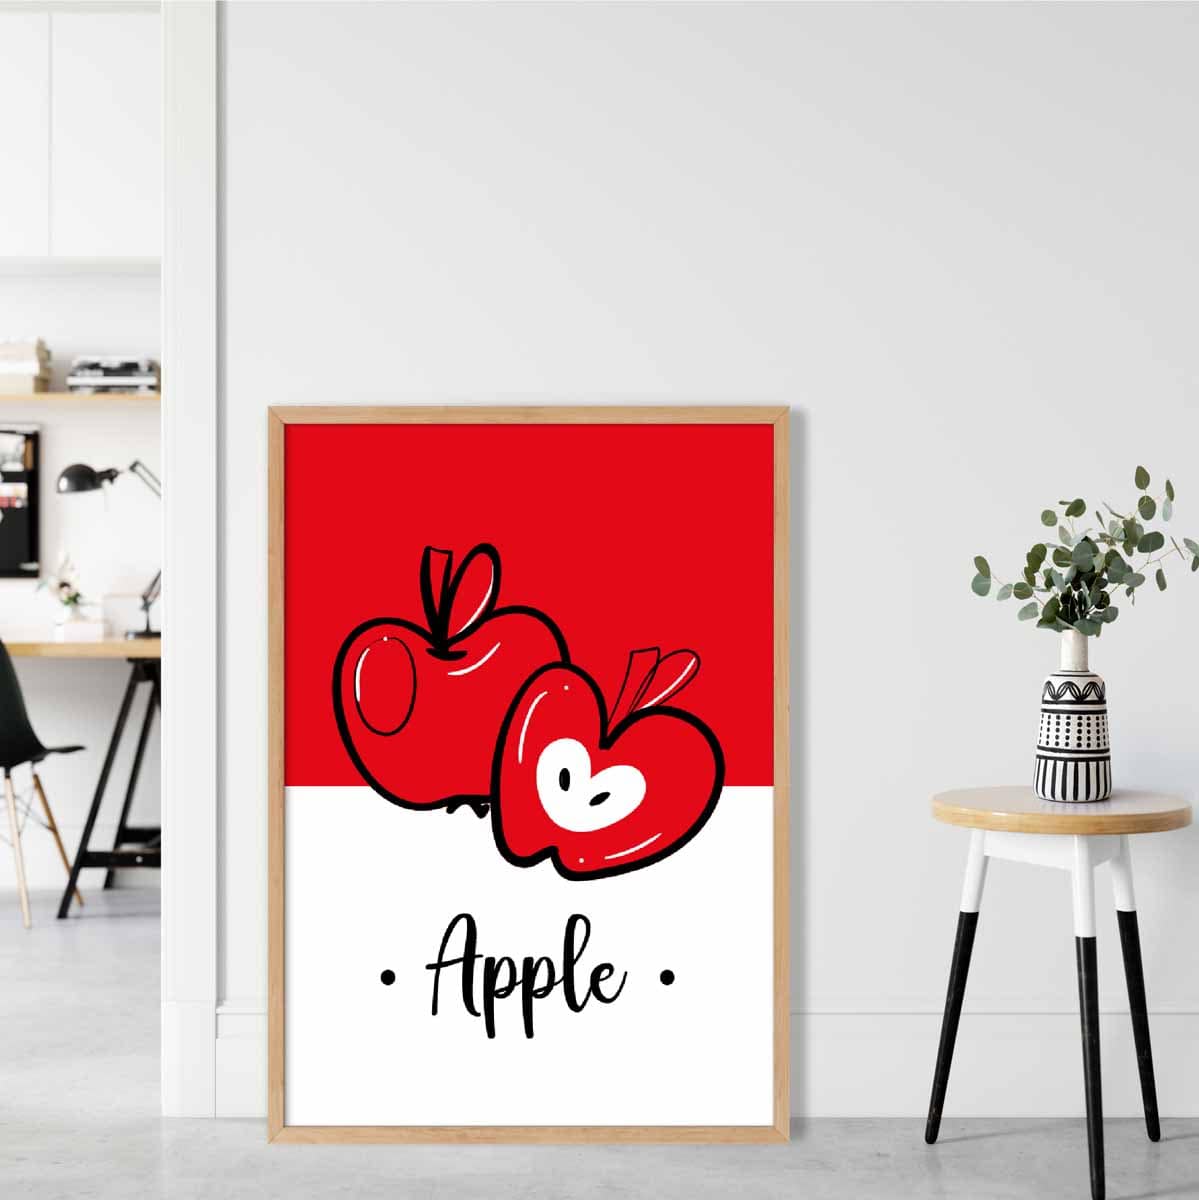 Sketch Fruit Poster of Apples in Red